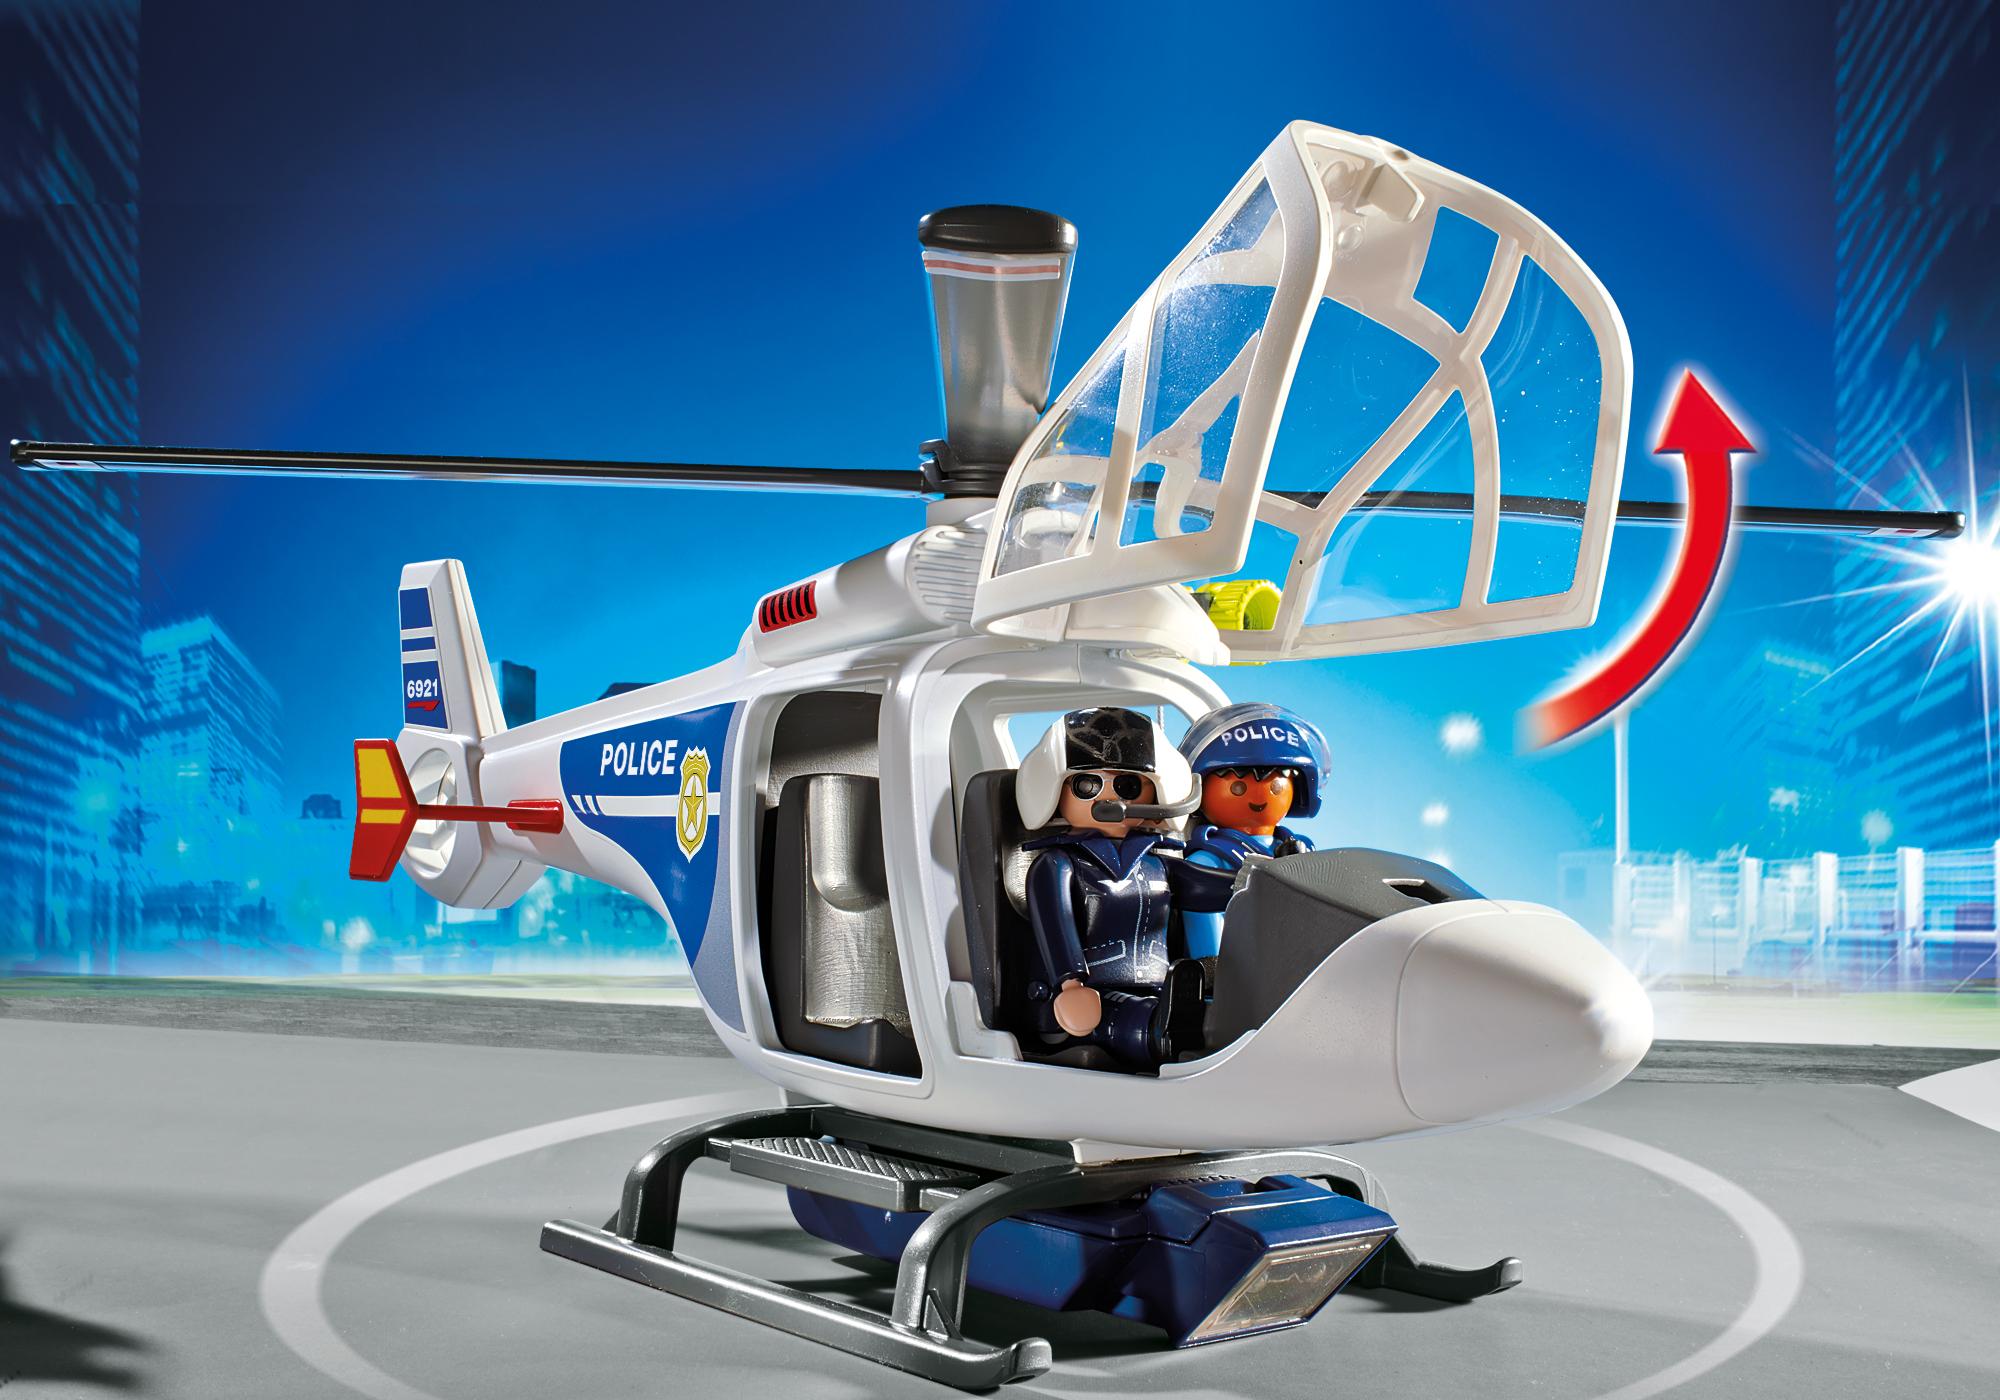 helicoptere police playmobil 6921